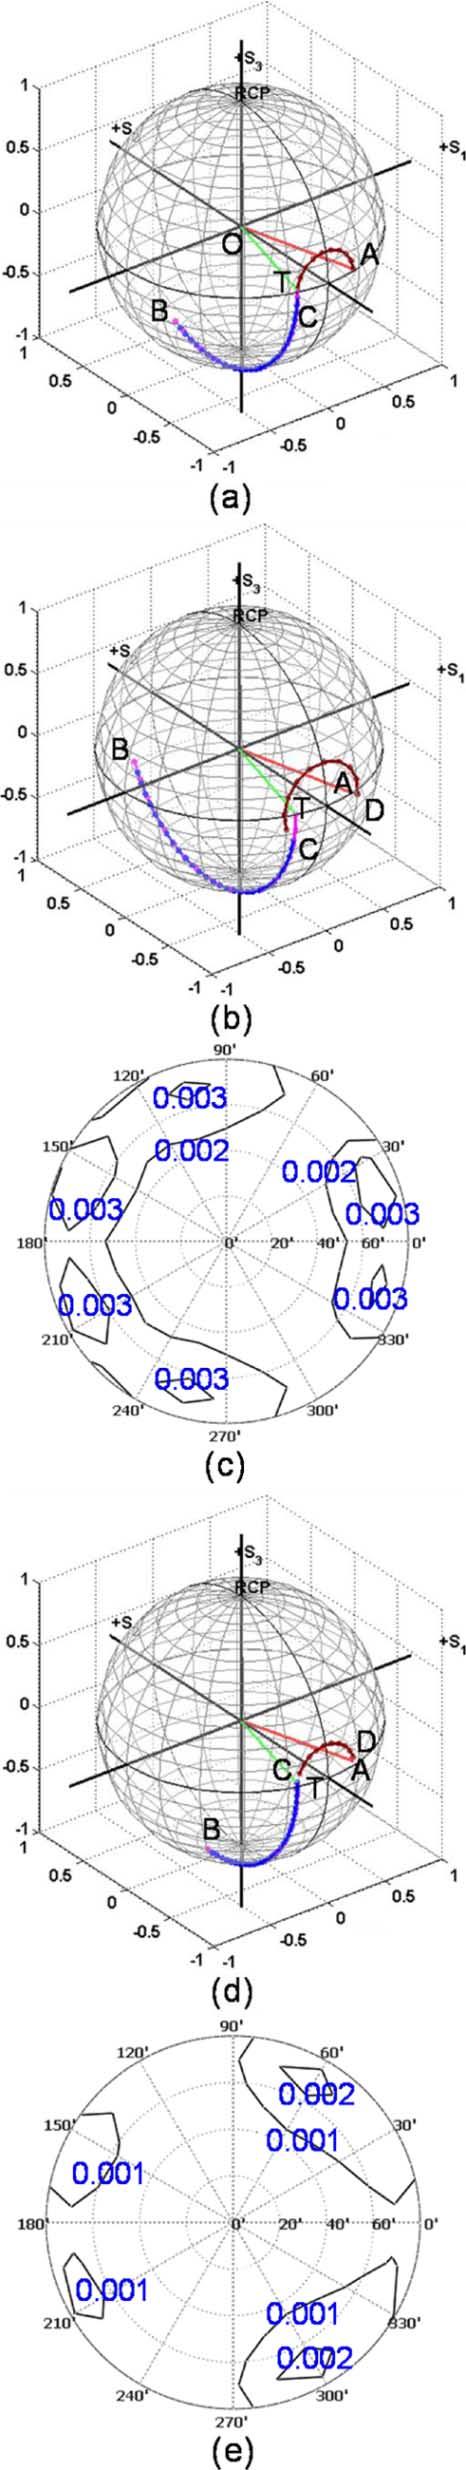 144 JOURNAL OF DISPLAY TECHNOLOGY, VOL. 5, NO. 5, MAY 2009 Fig. 6. Isocontrast contour of MVA-LCD at = 550 nm with the compensation scheme shown in Fig. 4. III. RESULTS Fig. 5. Polarization state tracing on Poincaré sphere for the compensation scheme shown in Fig.